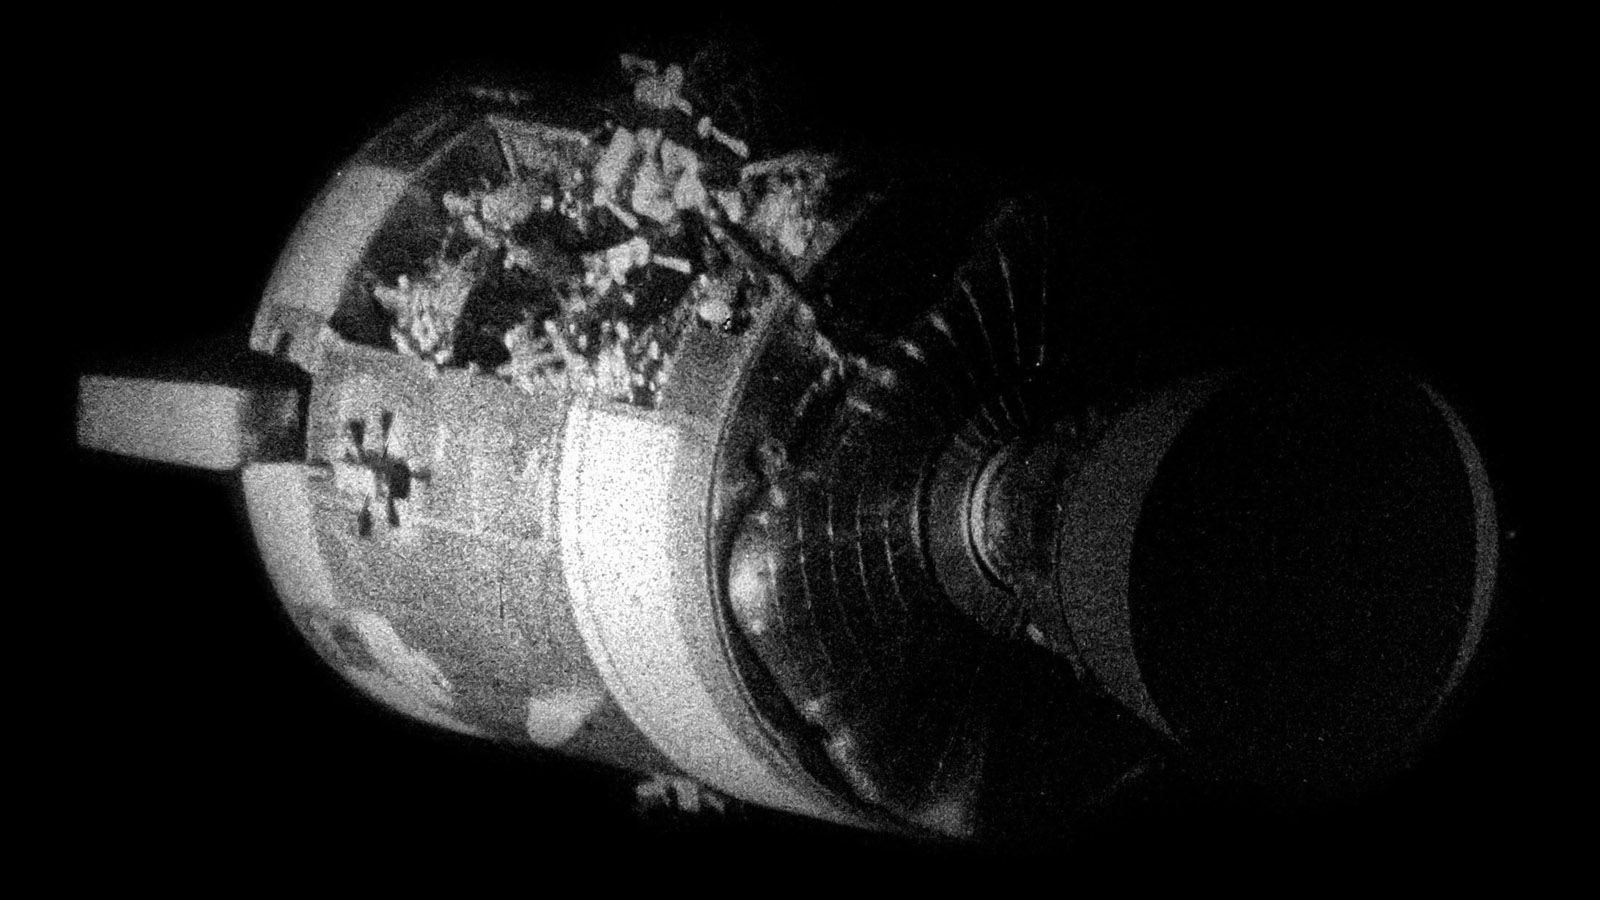 How NASA MacGyvered The Crippled Apollo 13 Mission Safely Home